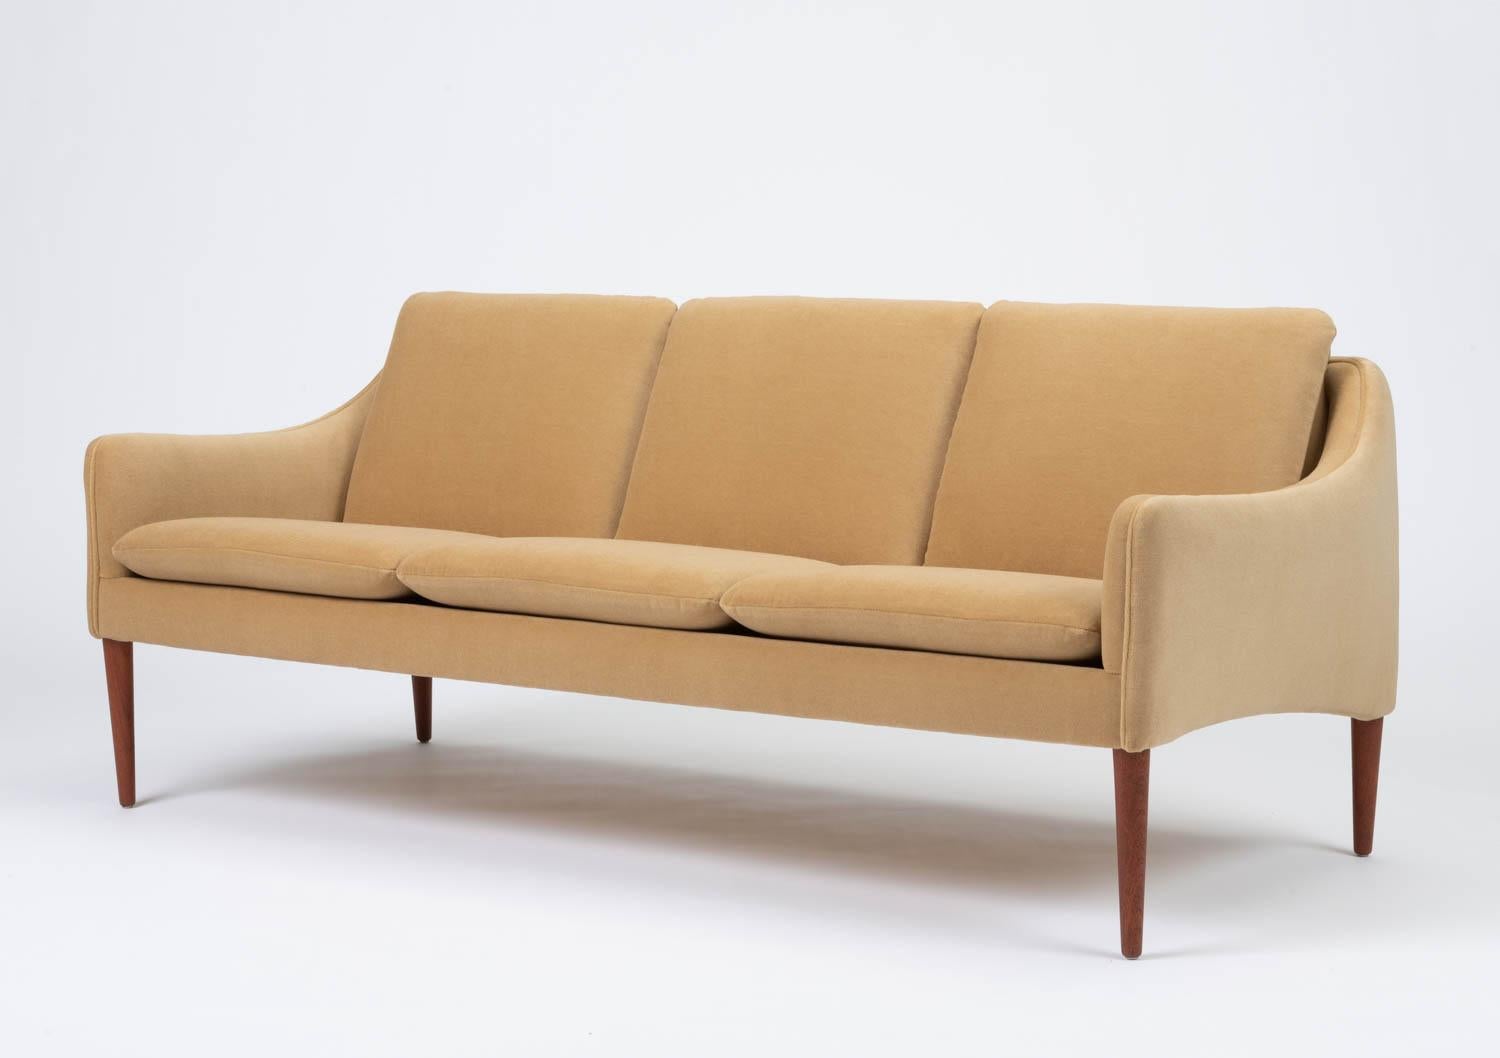 Minimalist three seat sofa by Danish designer Hans Olsen for CS Møbler, circa 1960. The sculpted frame has been newly recovered in a sophisticated camel colored Italian 100% mohair and the straps have been replaced with new webbing. The tapered teak